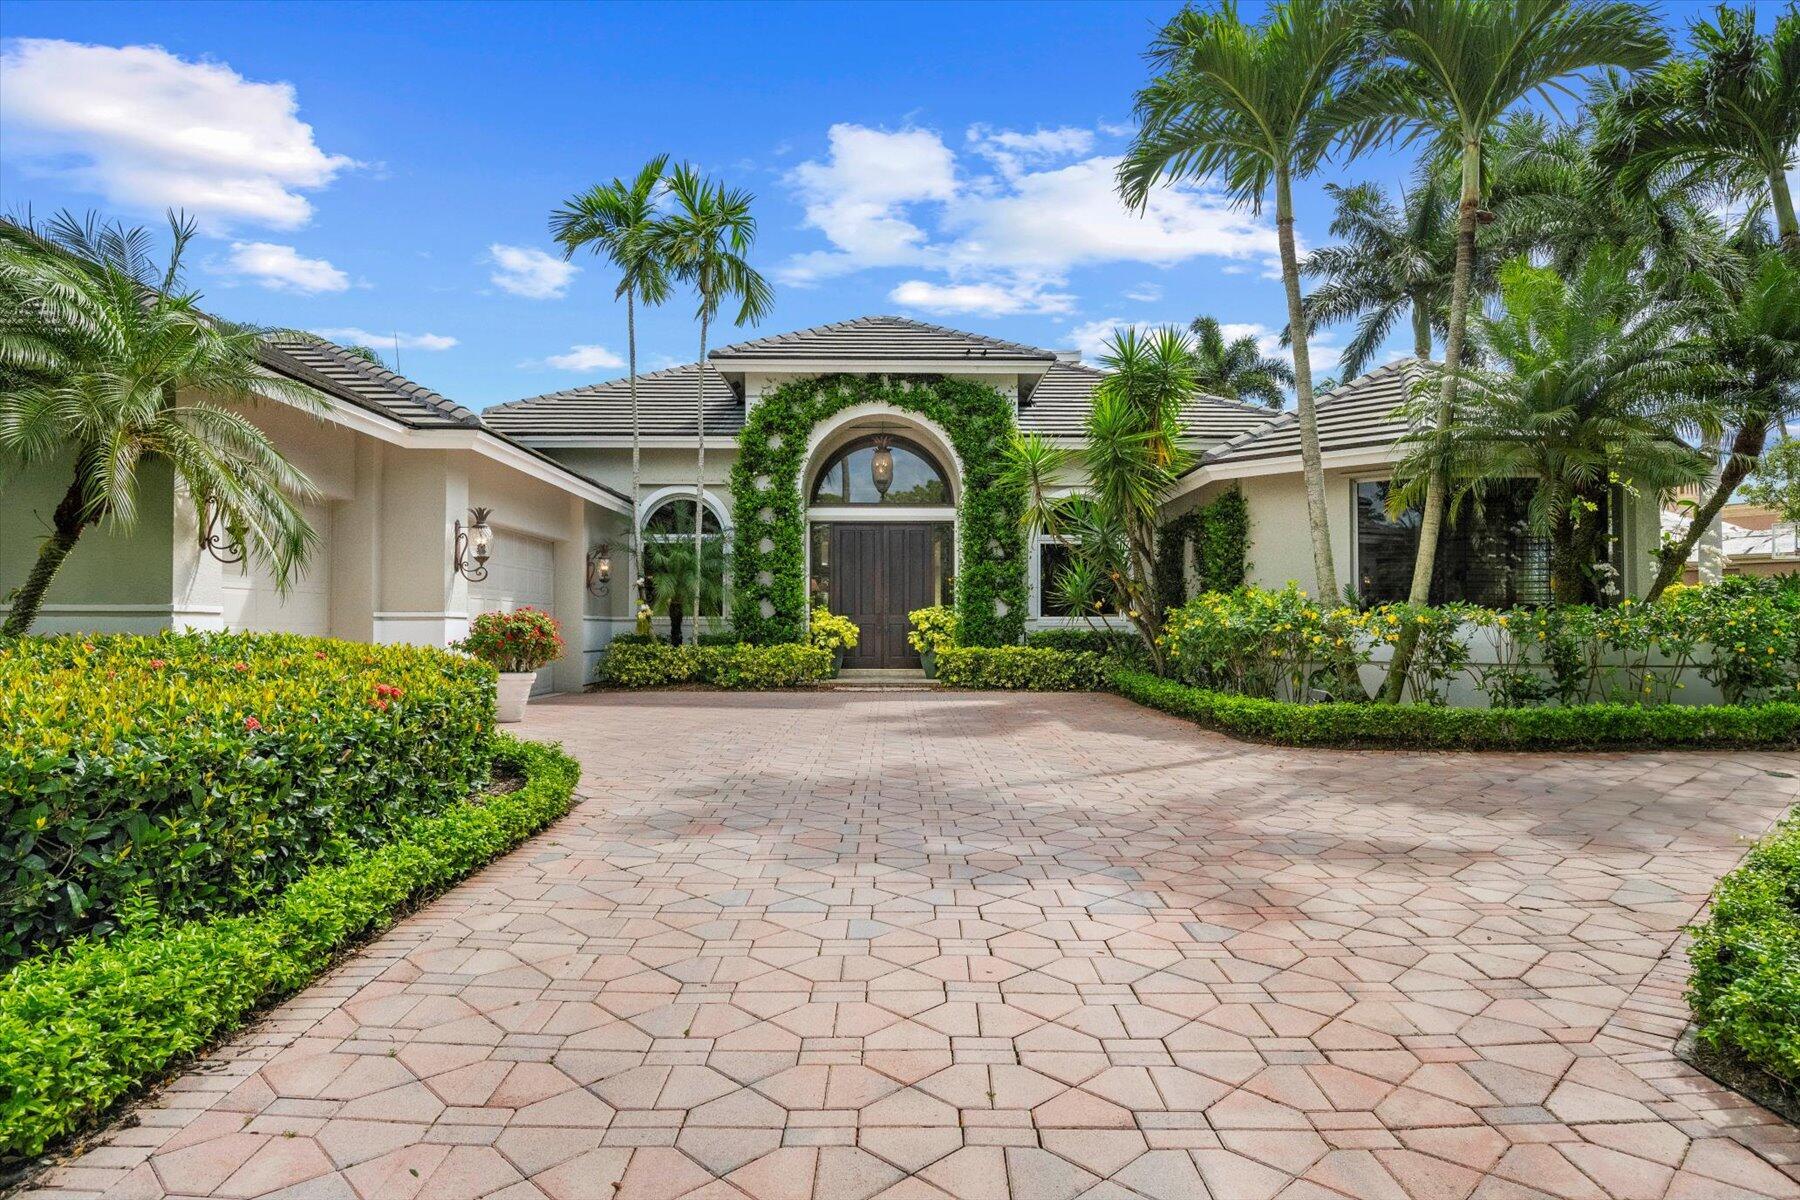 This beautiful estate home, located in the very highly sought after Loxahatchee Club in Jupiter FL is offered at $5,550,000. 274 Locha Drive instantly invites you into a spacious and open floorplan that beautifully captures the expansive lake and golf views of our signature Jack Nicklaus designed golf course. With 4,190 square feet, this estate home's design ideally blends luxury and comfort. With 4 spacious bedrooms, 4.5 bathrooms, this rare property is perfectly suited for Buyers who appreciate quality and luxury. The heart of the house, the kitchen, opens seamlessly into the family room, offering a perfect setting for small family get-togethers as well as hosting luxurious parties. For those times you crave a bit more formality, the cozy living room is the perfect spot to unwind or catch up over a glass of wine. A separate upscale dining room is ideal for memorable dinners with friends and family. Outside, the home's grand pool, spa, and peaceful water feature designed with a raised deck, pergola and dramatic landscape lighting, offer an inviting escape into your own bit of paradise. 274 Locha Drive is a masterpiece of architecture and design, located in one of the finest private clubs in Florida.  The home's square footage can easily be expanded.  Existing floorplan and potential addition available upon request.  Please schedule your private tour today. 
Located in Jupiter, Florida, The Loxahatchee Club is the definition of refined elegance and natural beauty. This exclusive private club exudes sophistication, offering its members a sanctuary of luxury and leisure. The recently renovated clubhouse has timeless charm, warmth and functionality.  From the pristine golf course designed by Jack Nicklaus to the state-of-the-art amenities and impeccable service, The Loxahatchee Club embodies the epitome of upscale living and leisure in the heart of Jupiter's idyllic surroundings.